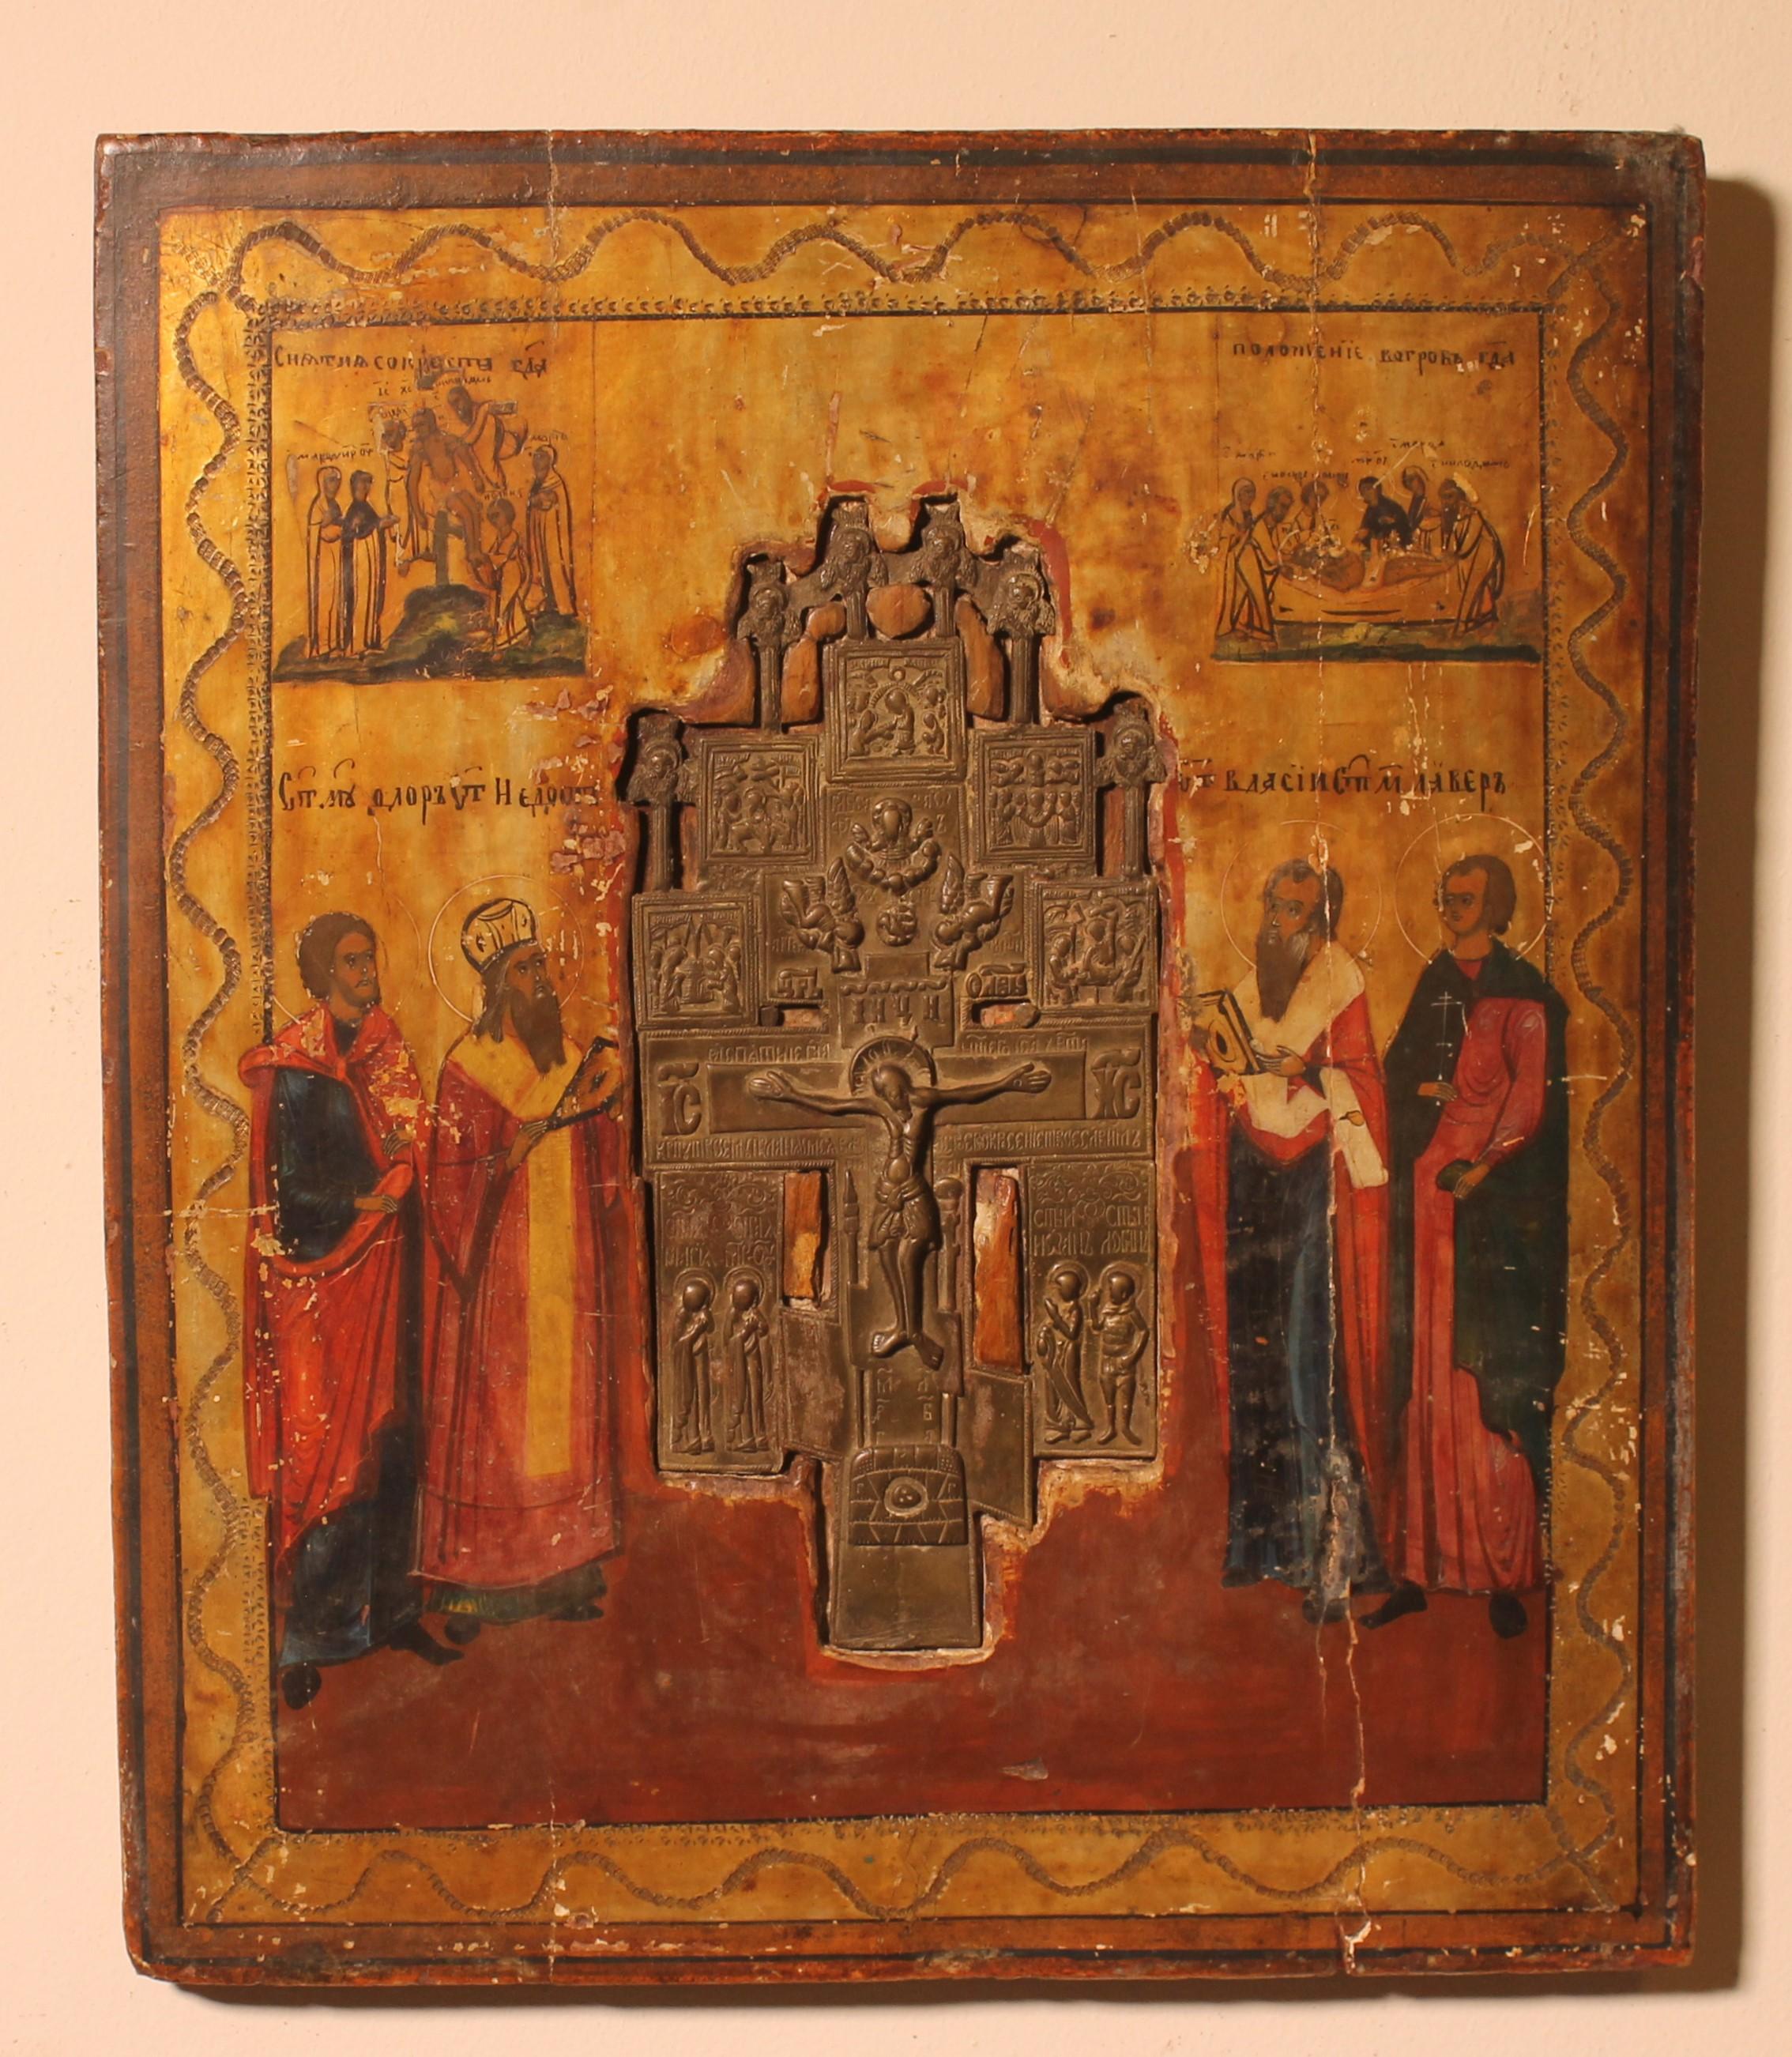 Very beautiful Russian icon with a processional cross in its center from the 17th century

We can see that the icon was created to accommodate the processional cross with the Christ in the center and the apostles looking at him

Beautiful patina